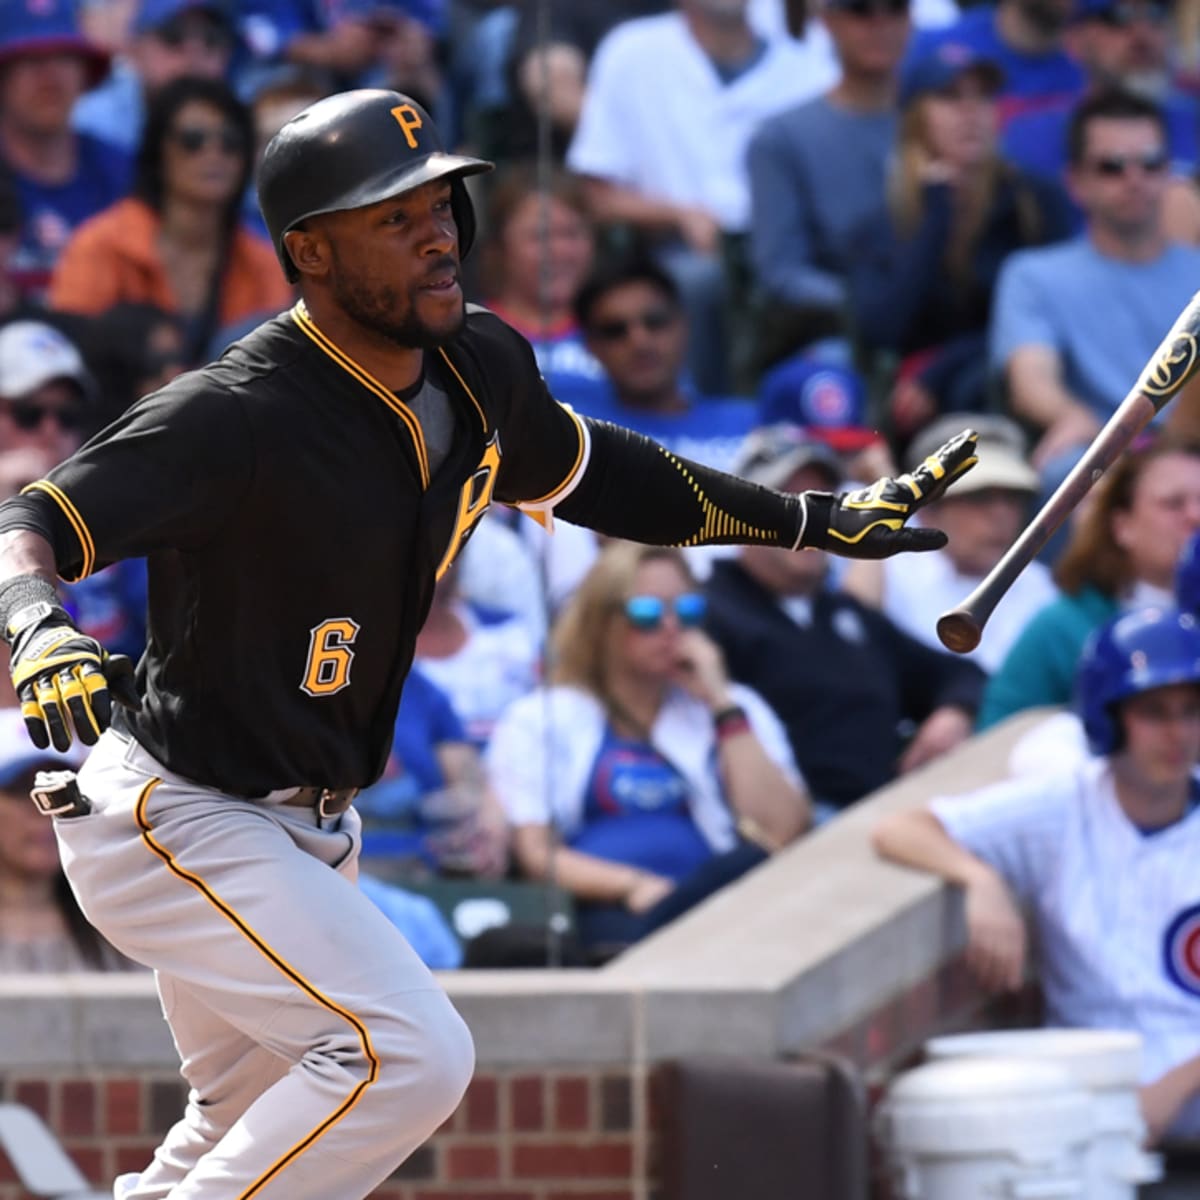 starling marte physique